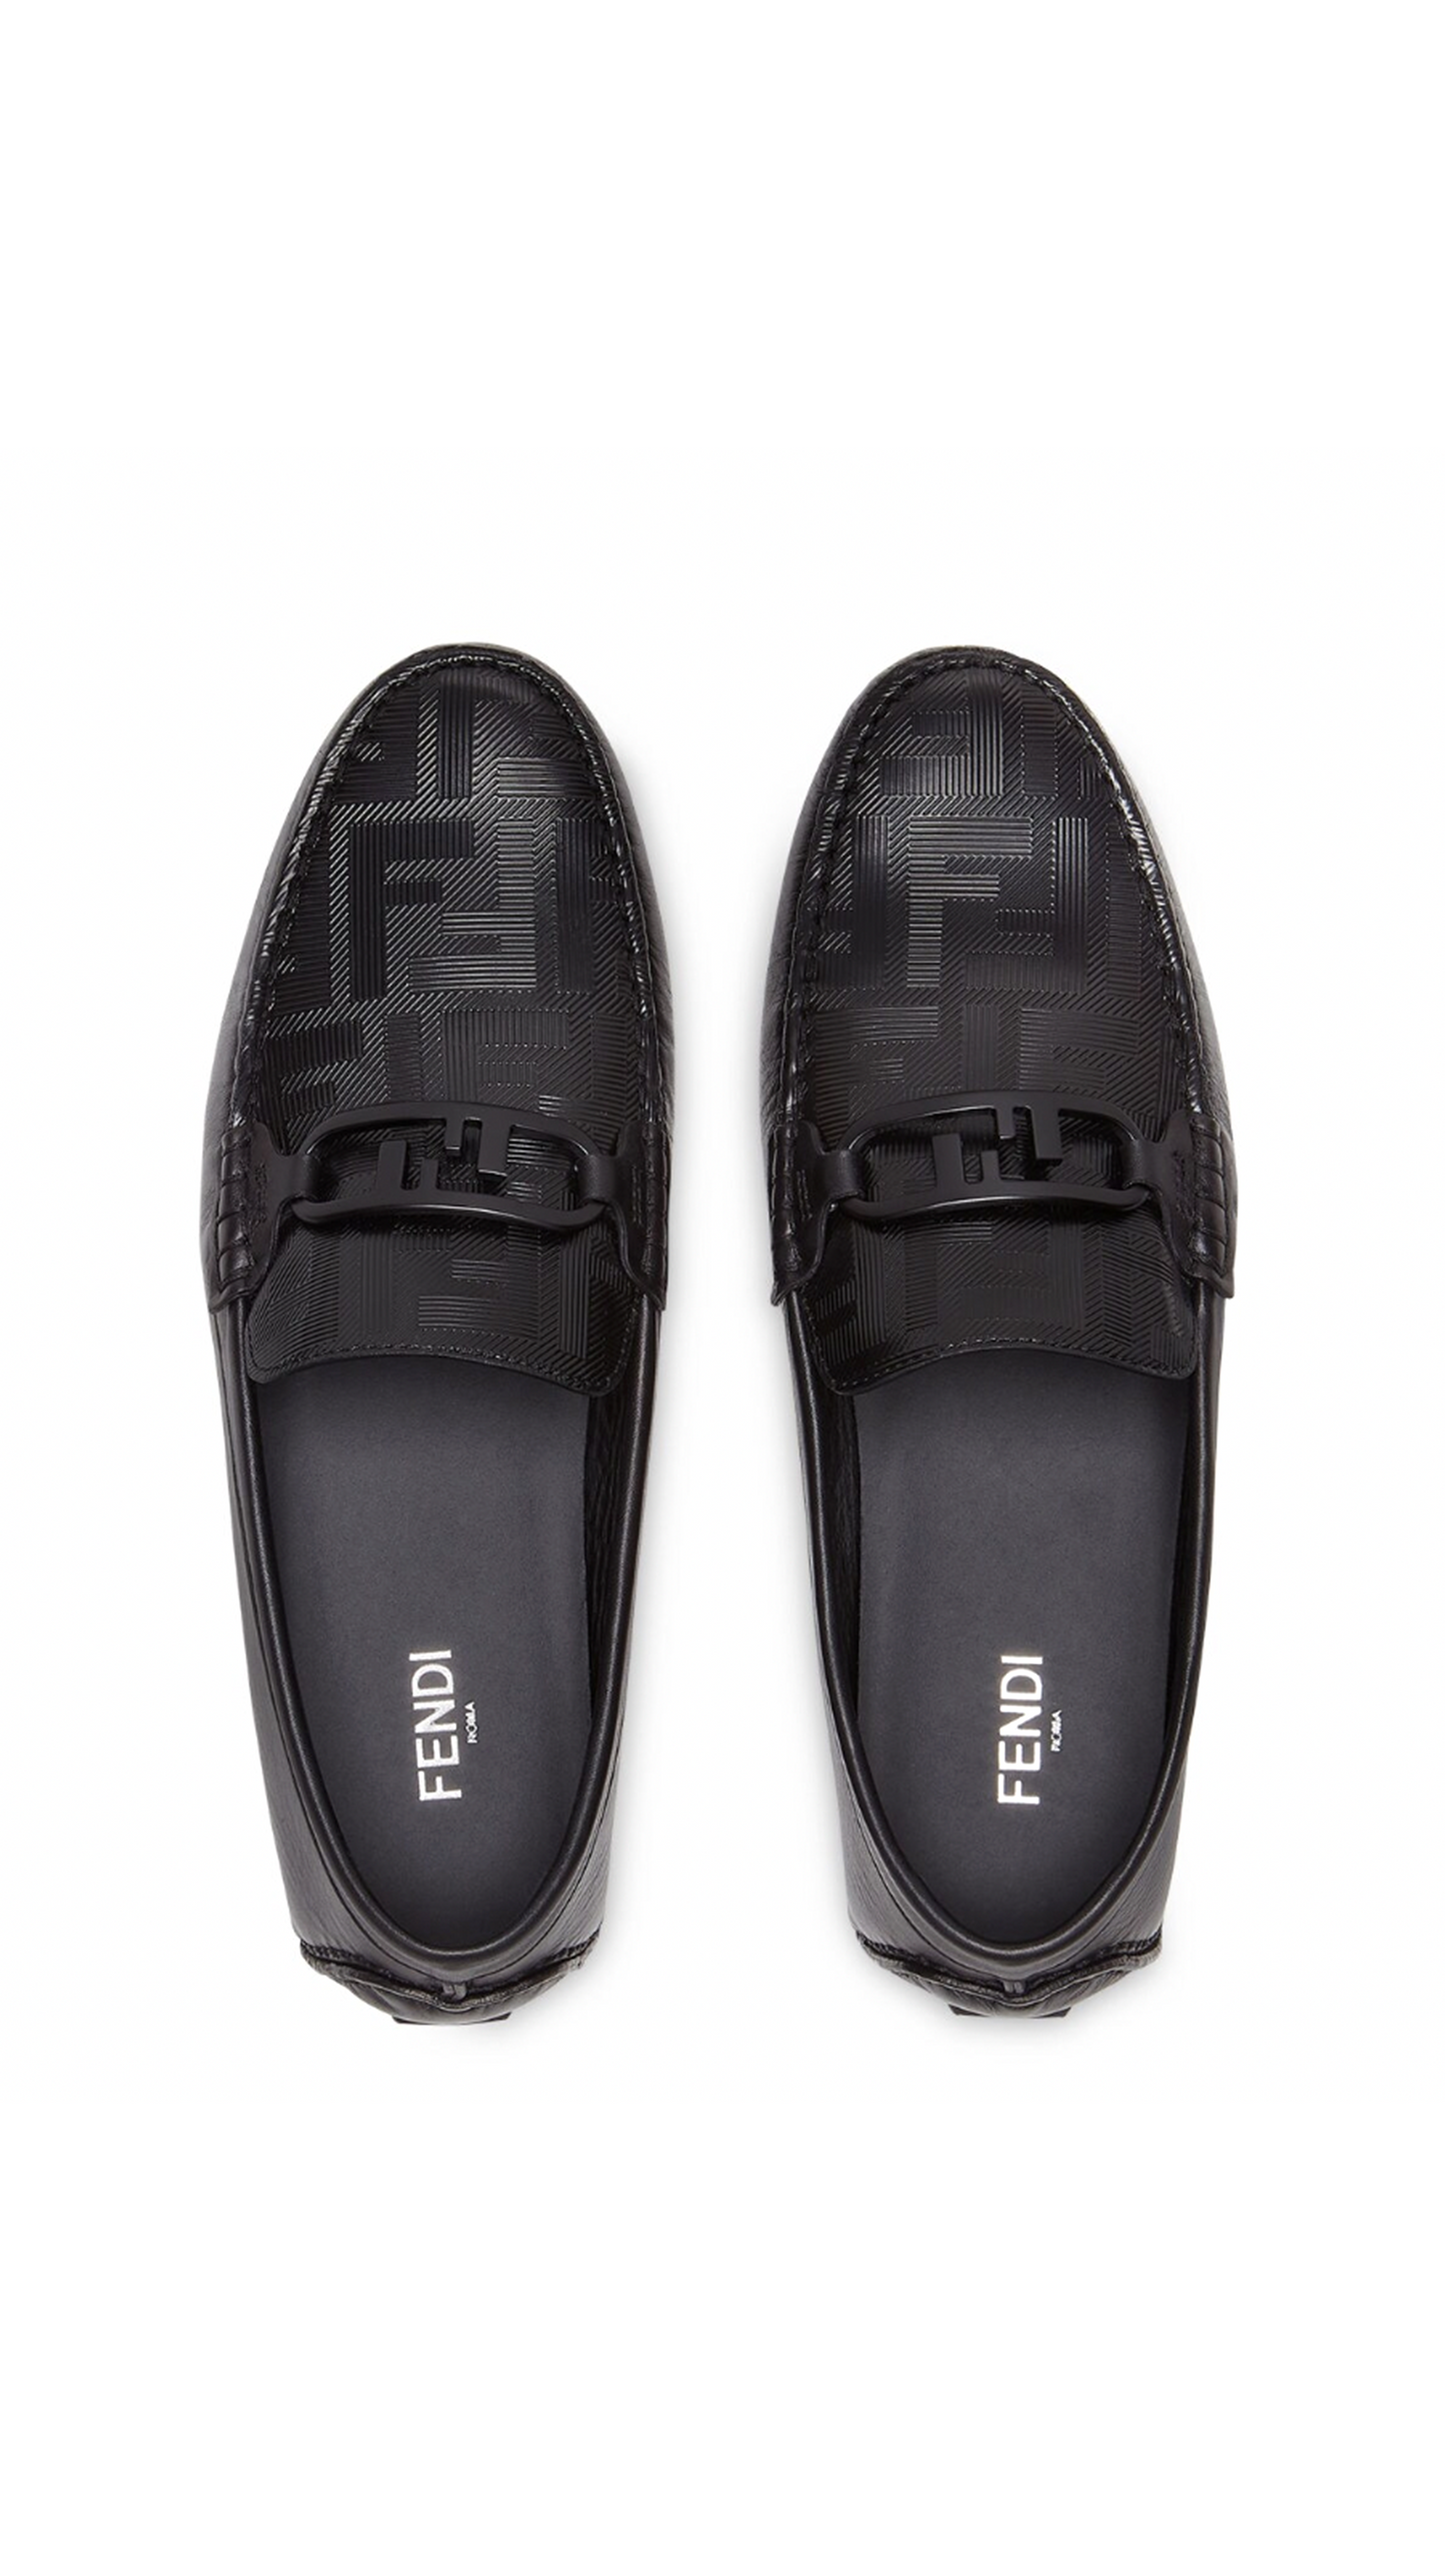 O'Lock Driving Loafers - Black